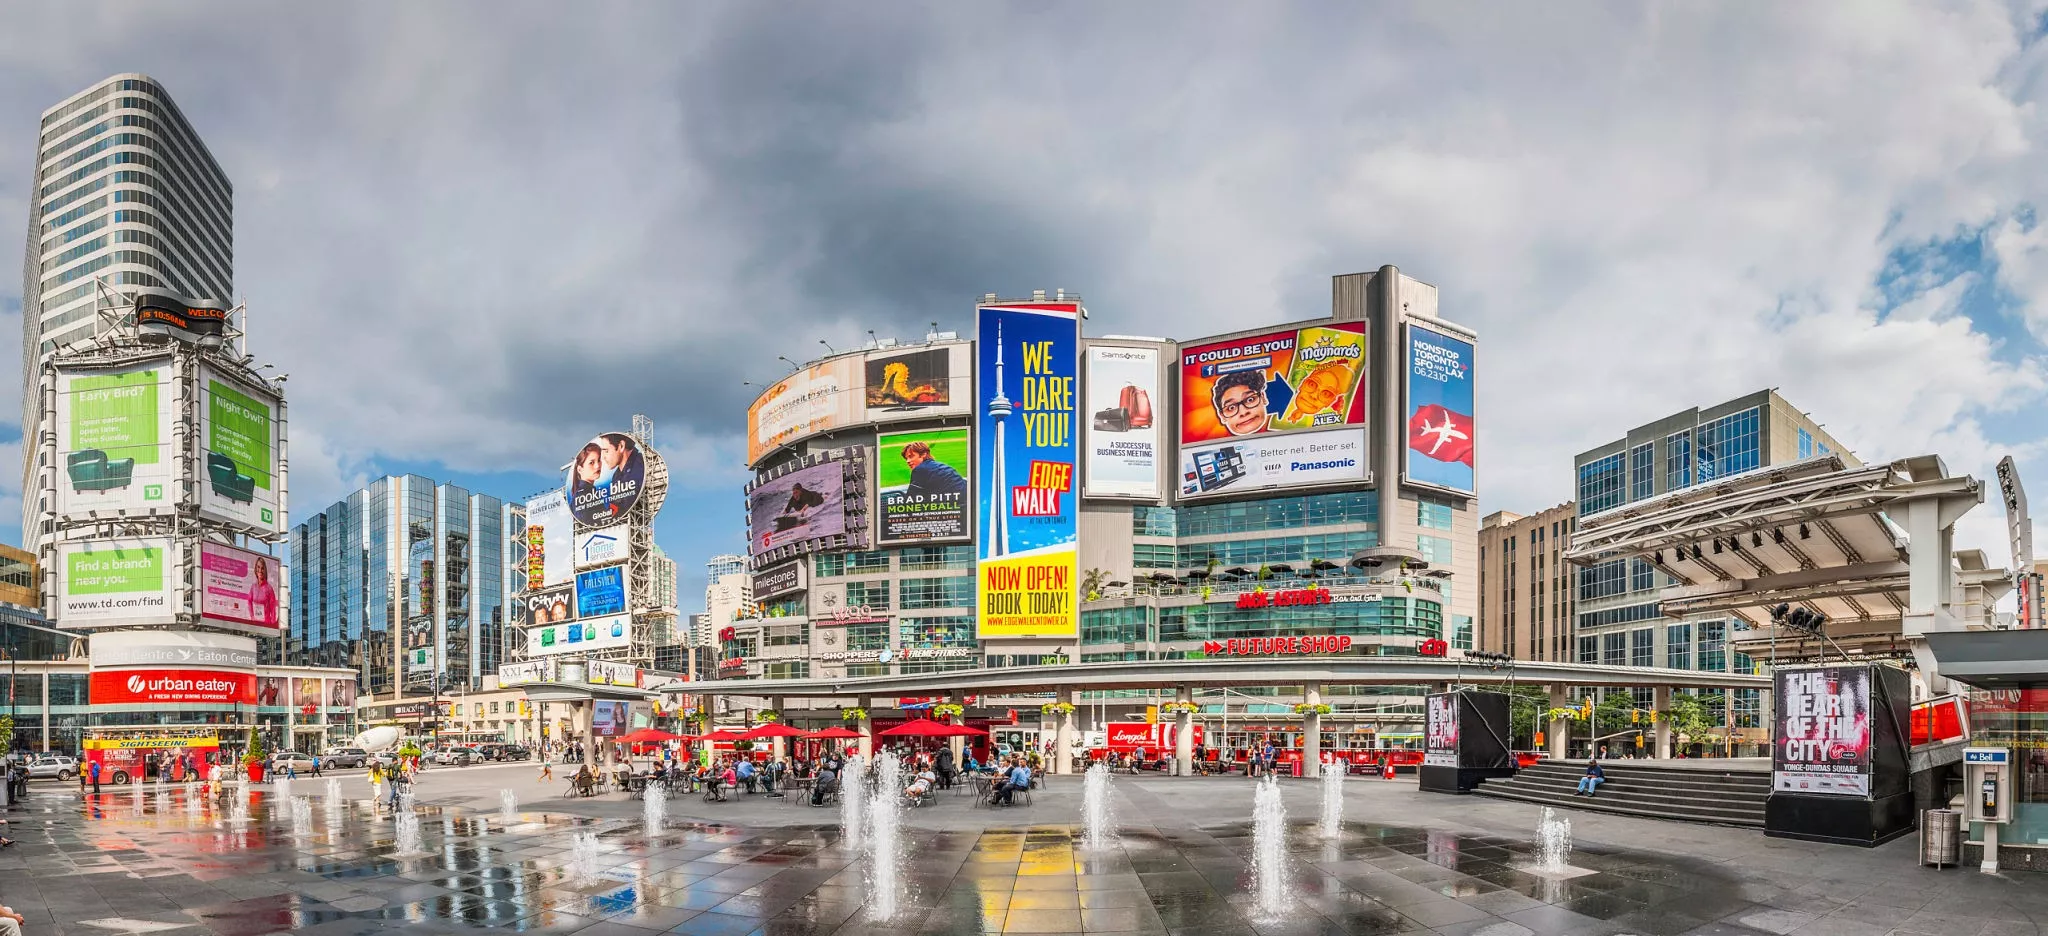 Young Dundas Square in Canada, North America | Architecture - Rated 3.9